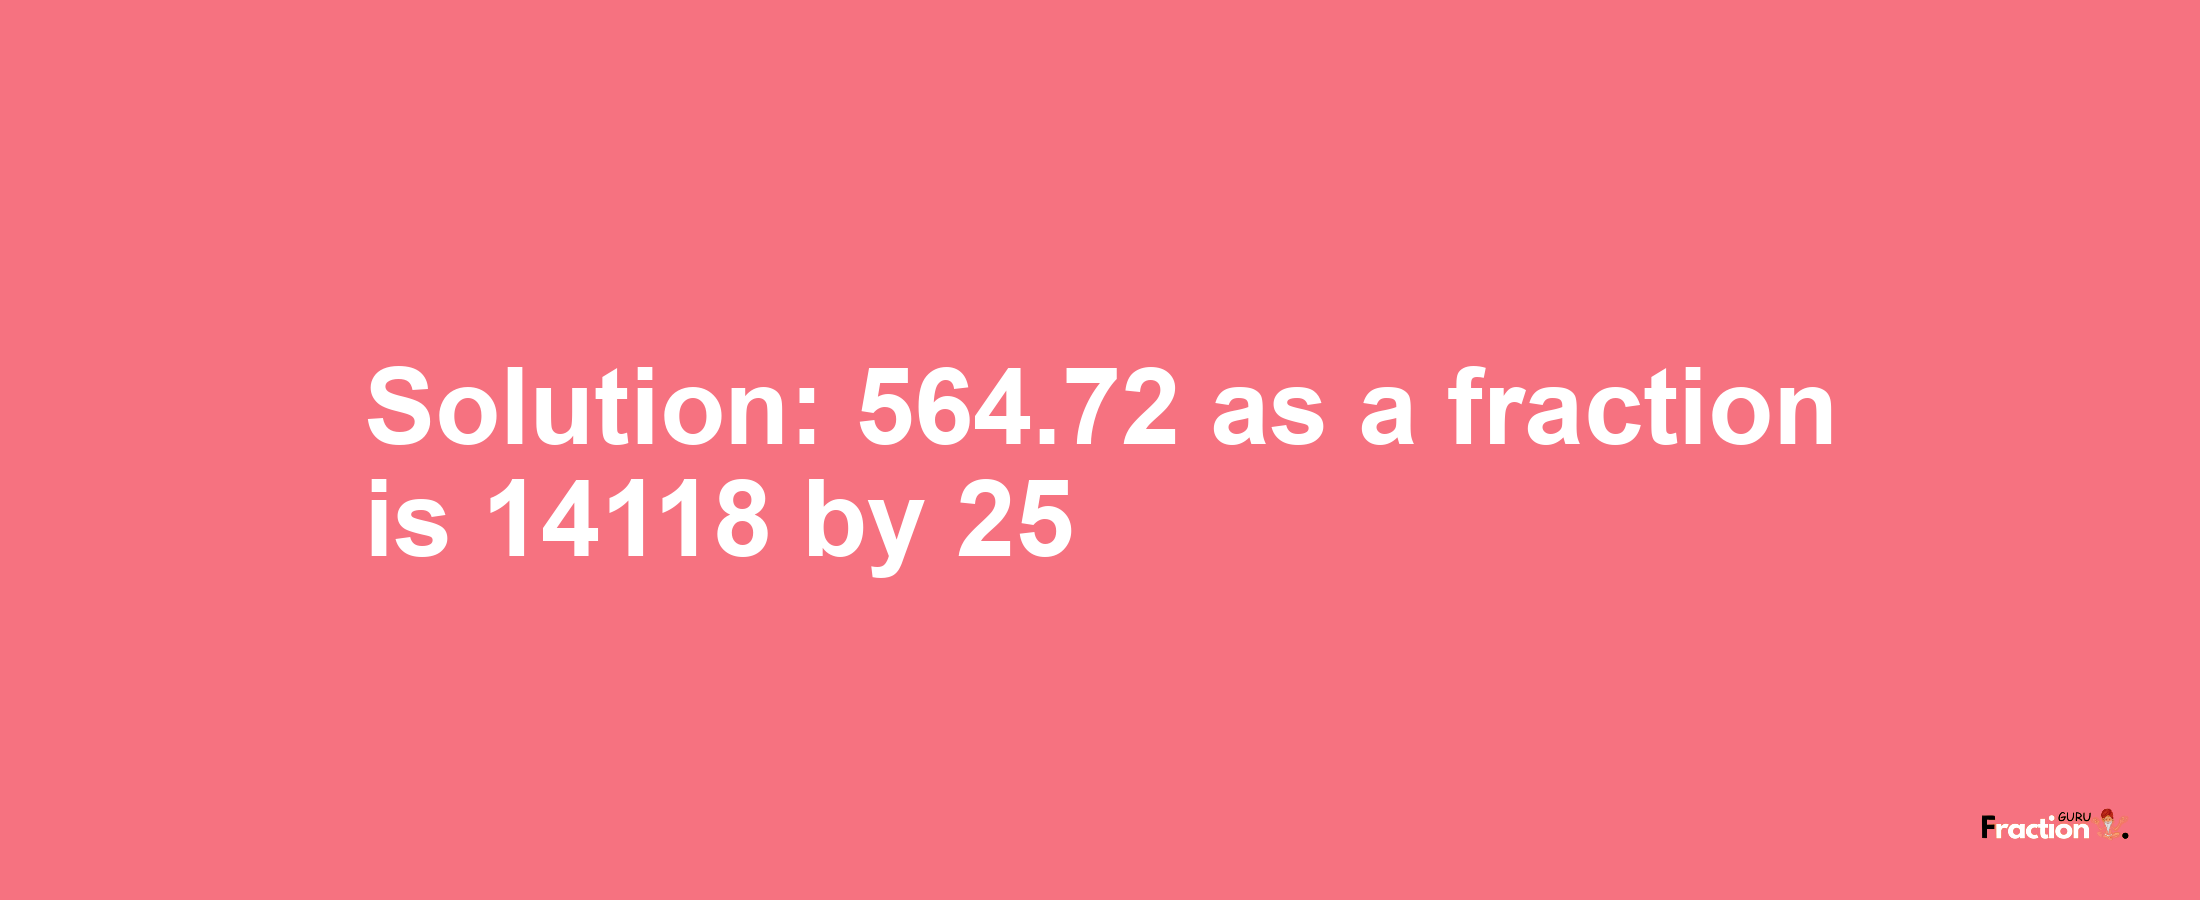 Solution:564.72 as a fraction is 14118/25